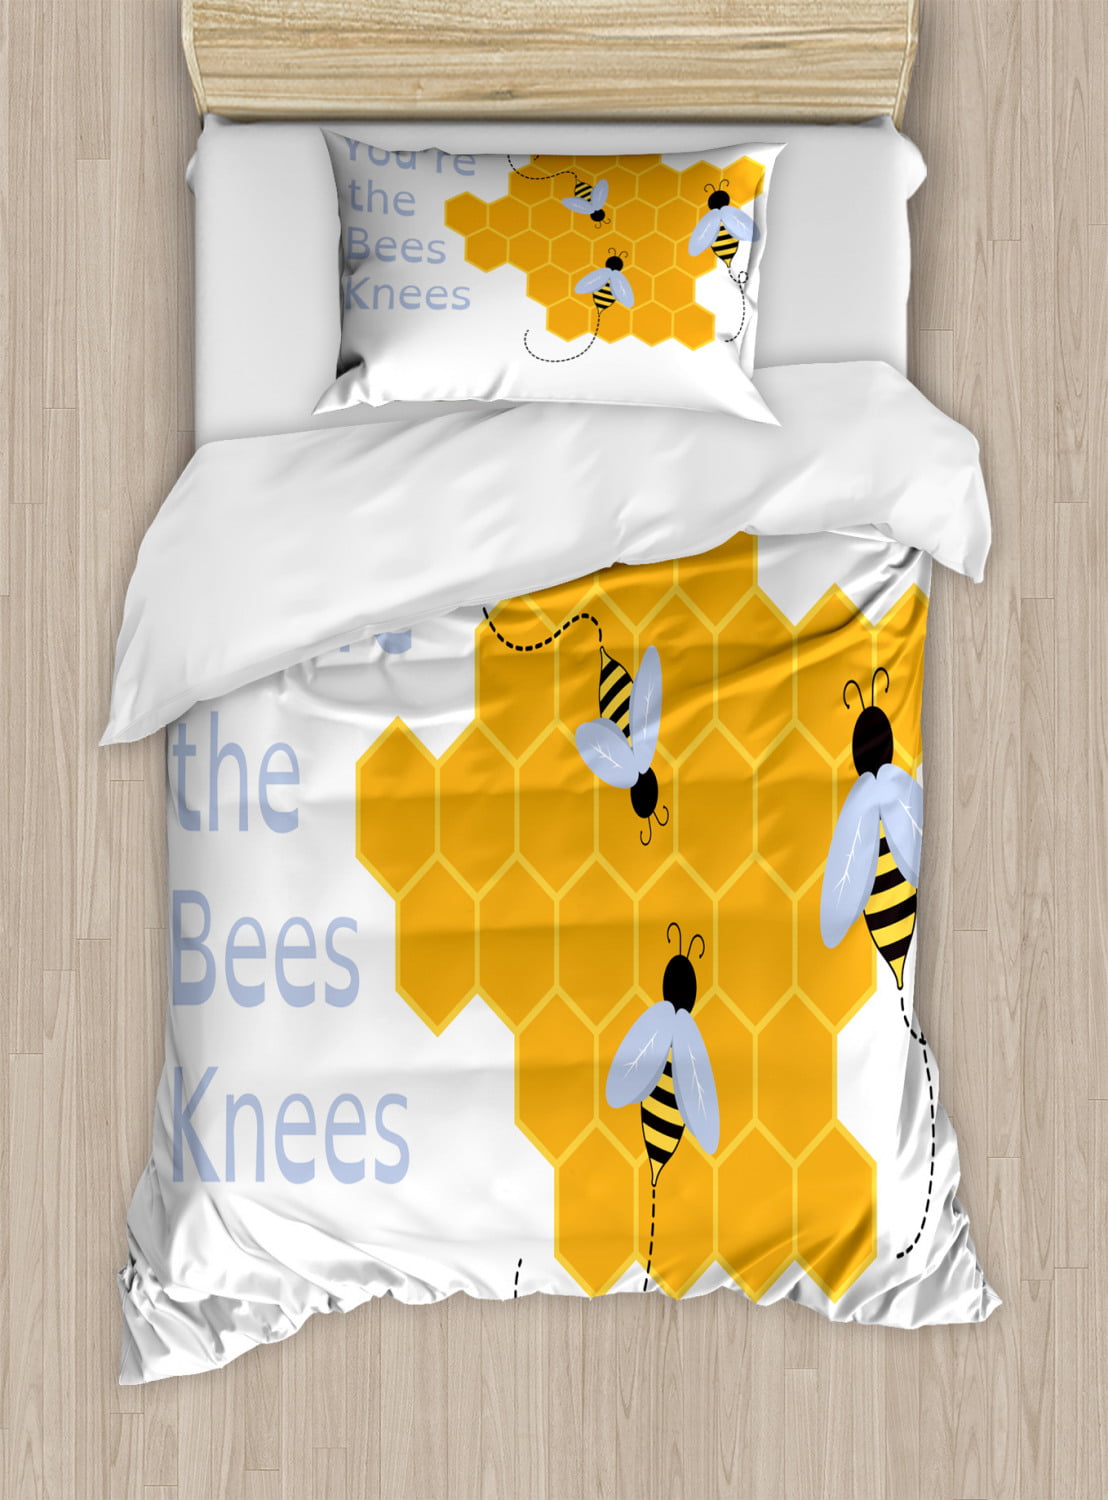 Toy Storage You're The Bees Knees Hexagonal Gift Box Wooden Personalised 